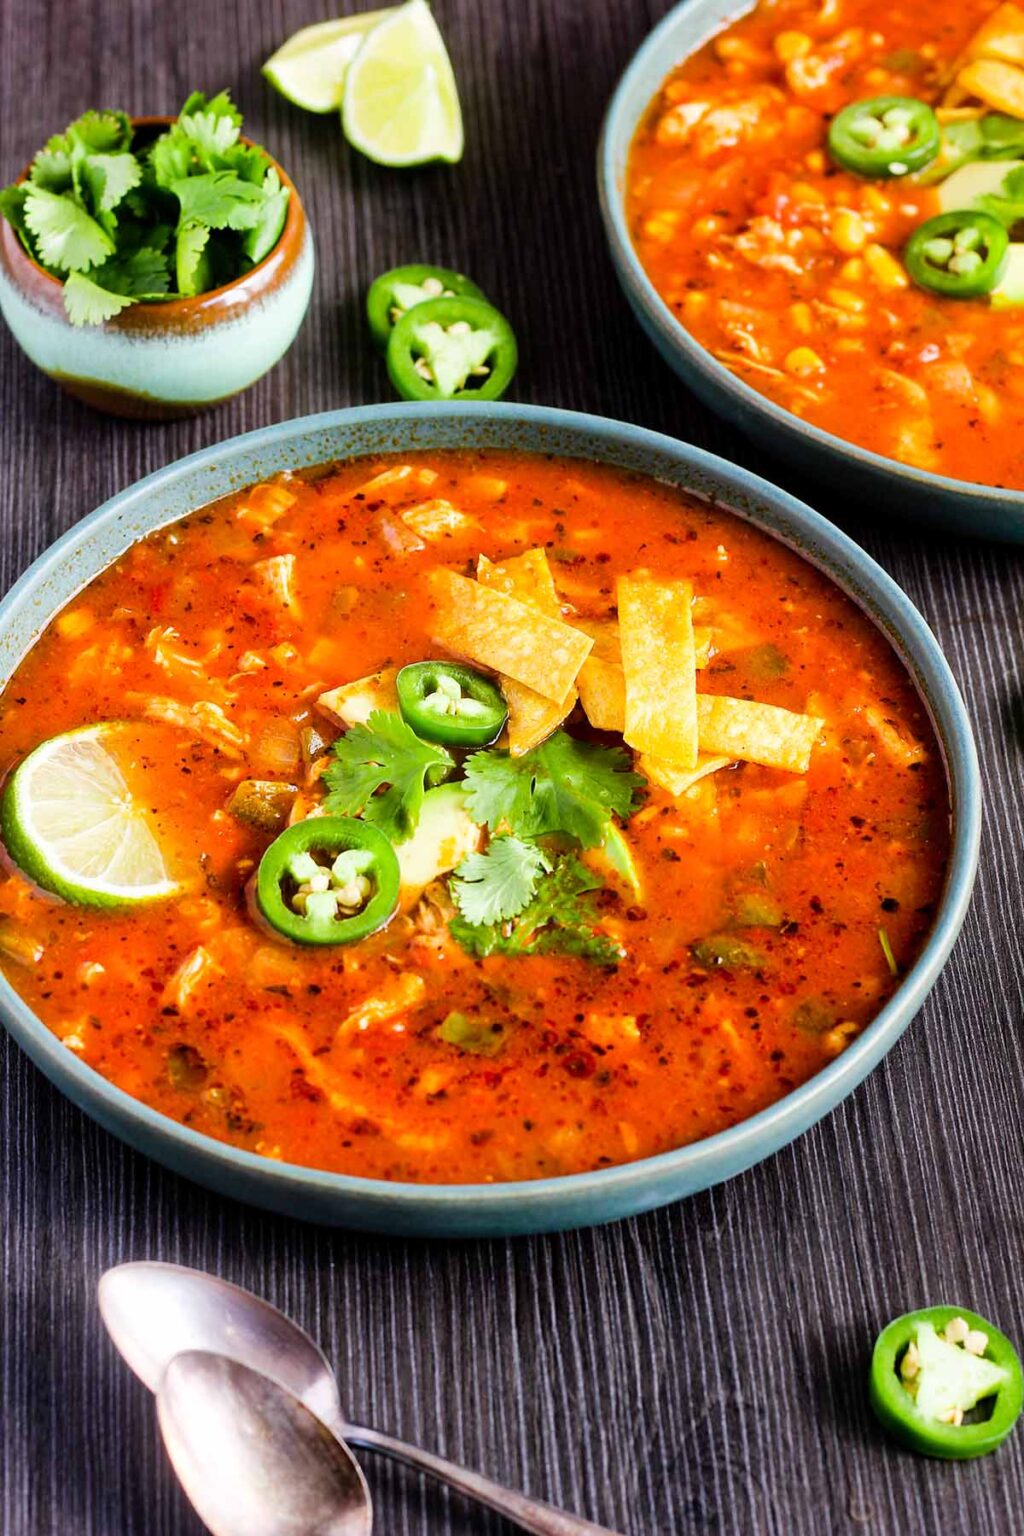 Chipotle Chicken Tortilla Soup (w/ Instant Pot Instructions) - Tao of Spice